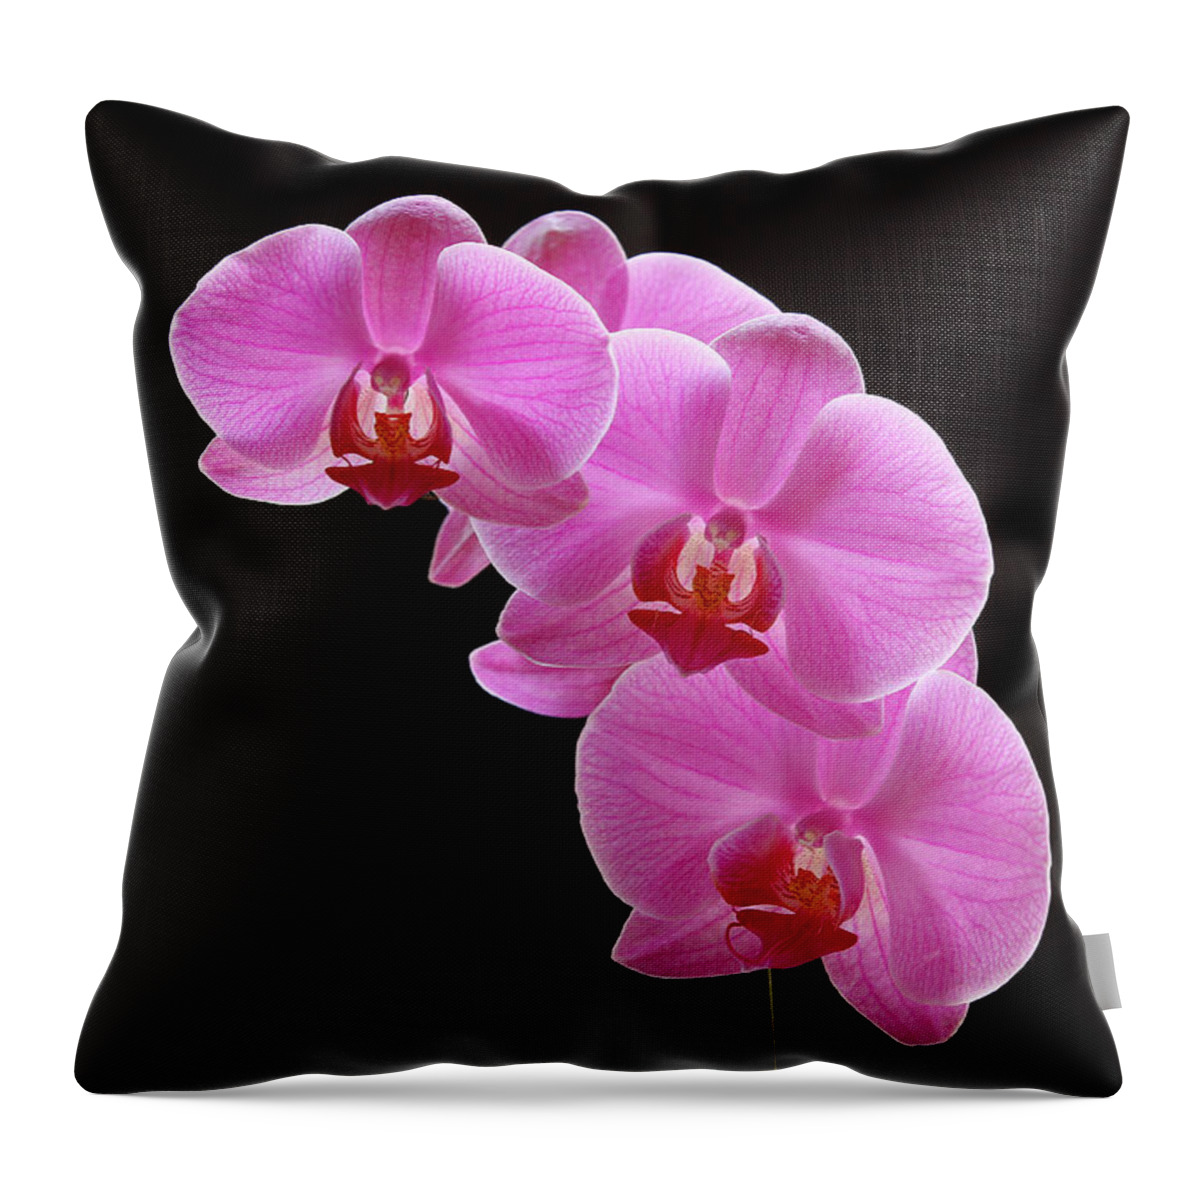 Orchid Throw Pillow featuring the photograph Glorious Pink Orchids by Juergen Roth